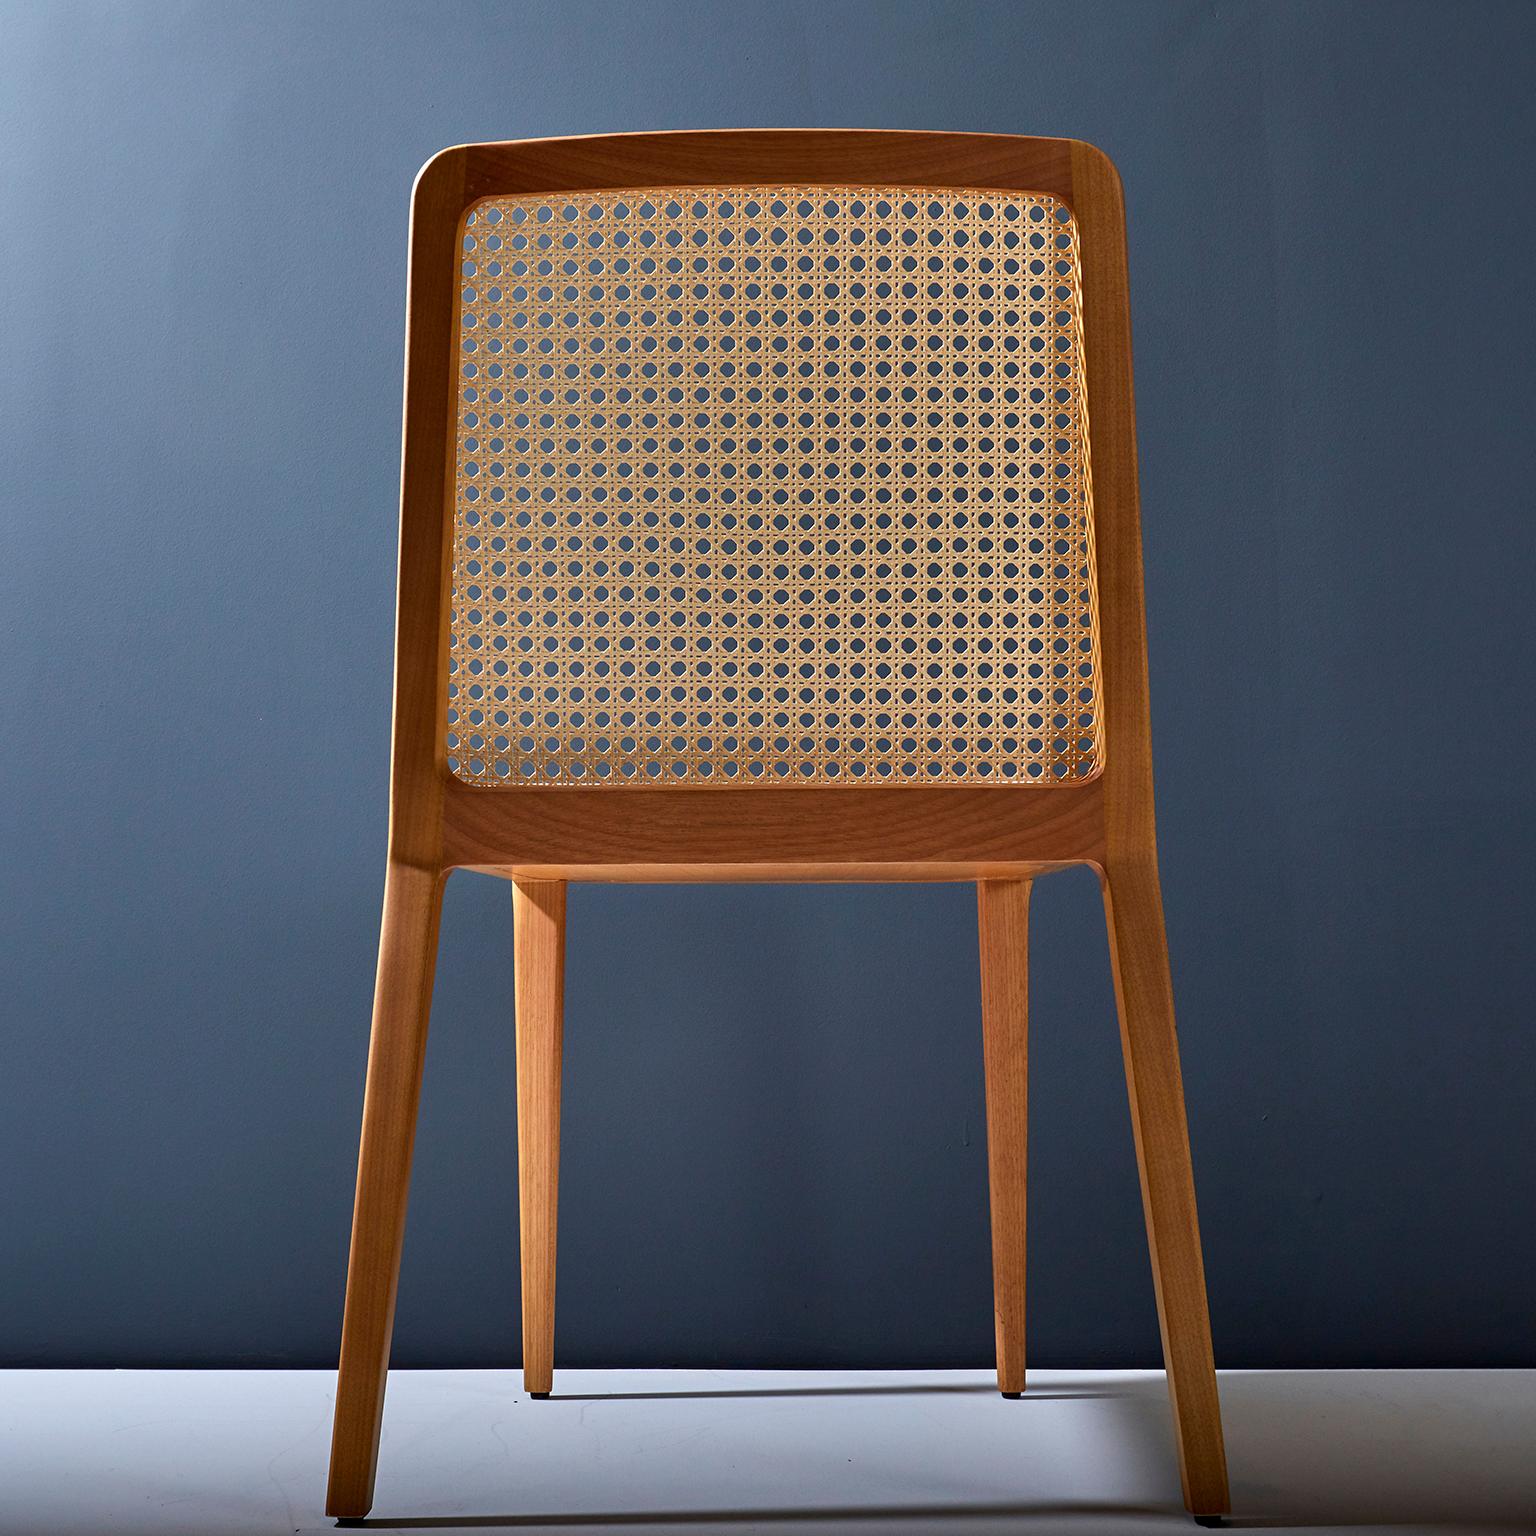 Brazilian Minimal style, solid wood chair, textiles or leather seatings, caning backboard For Sale